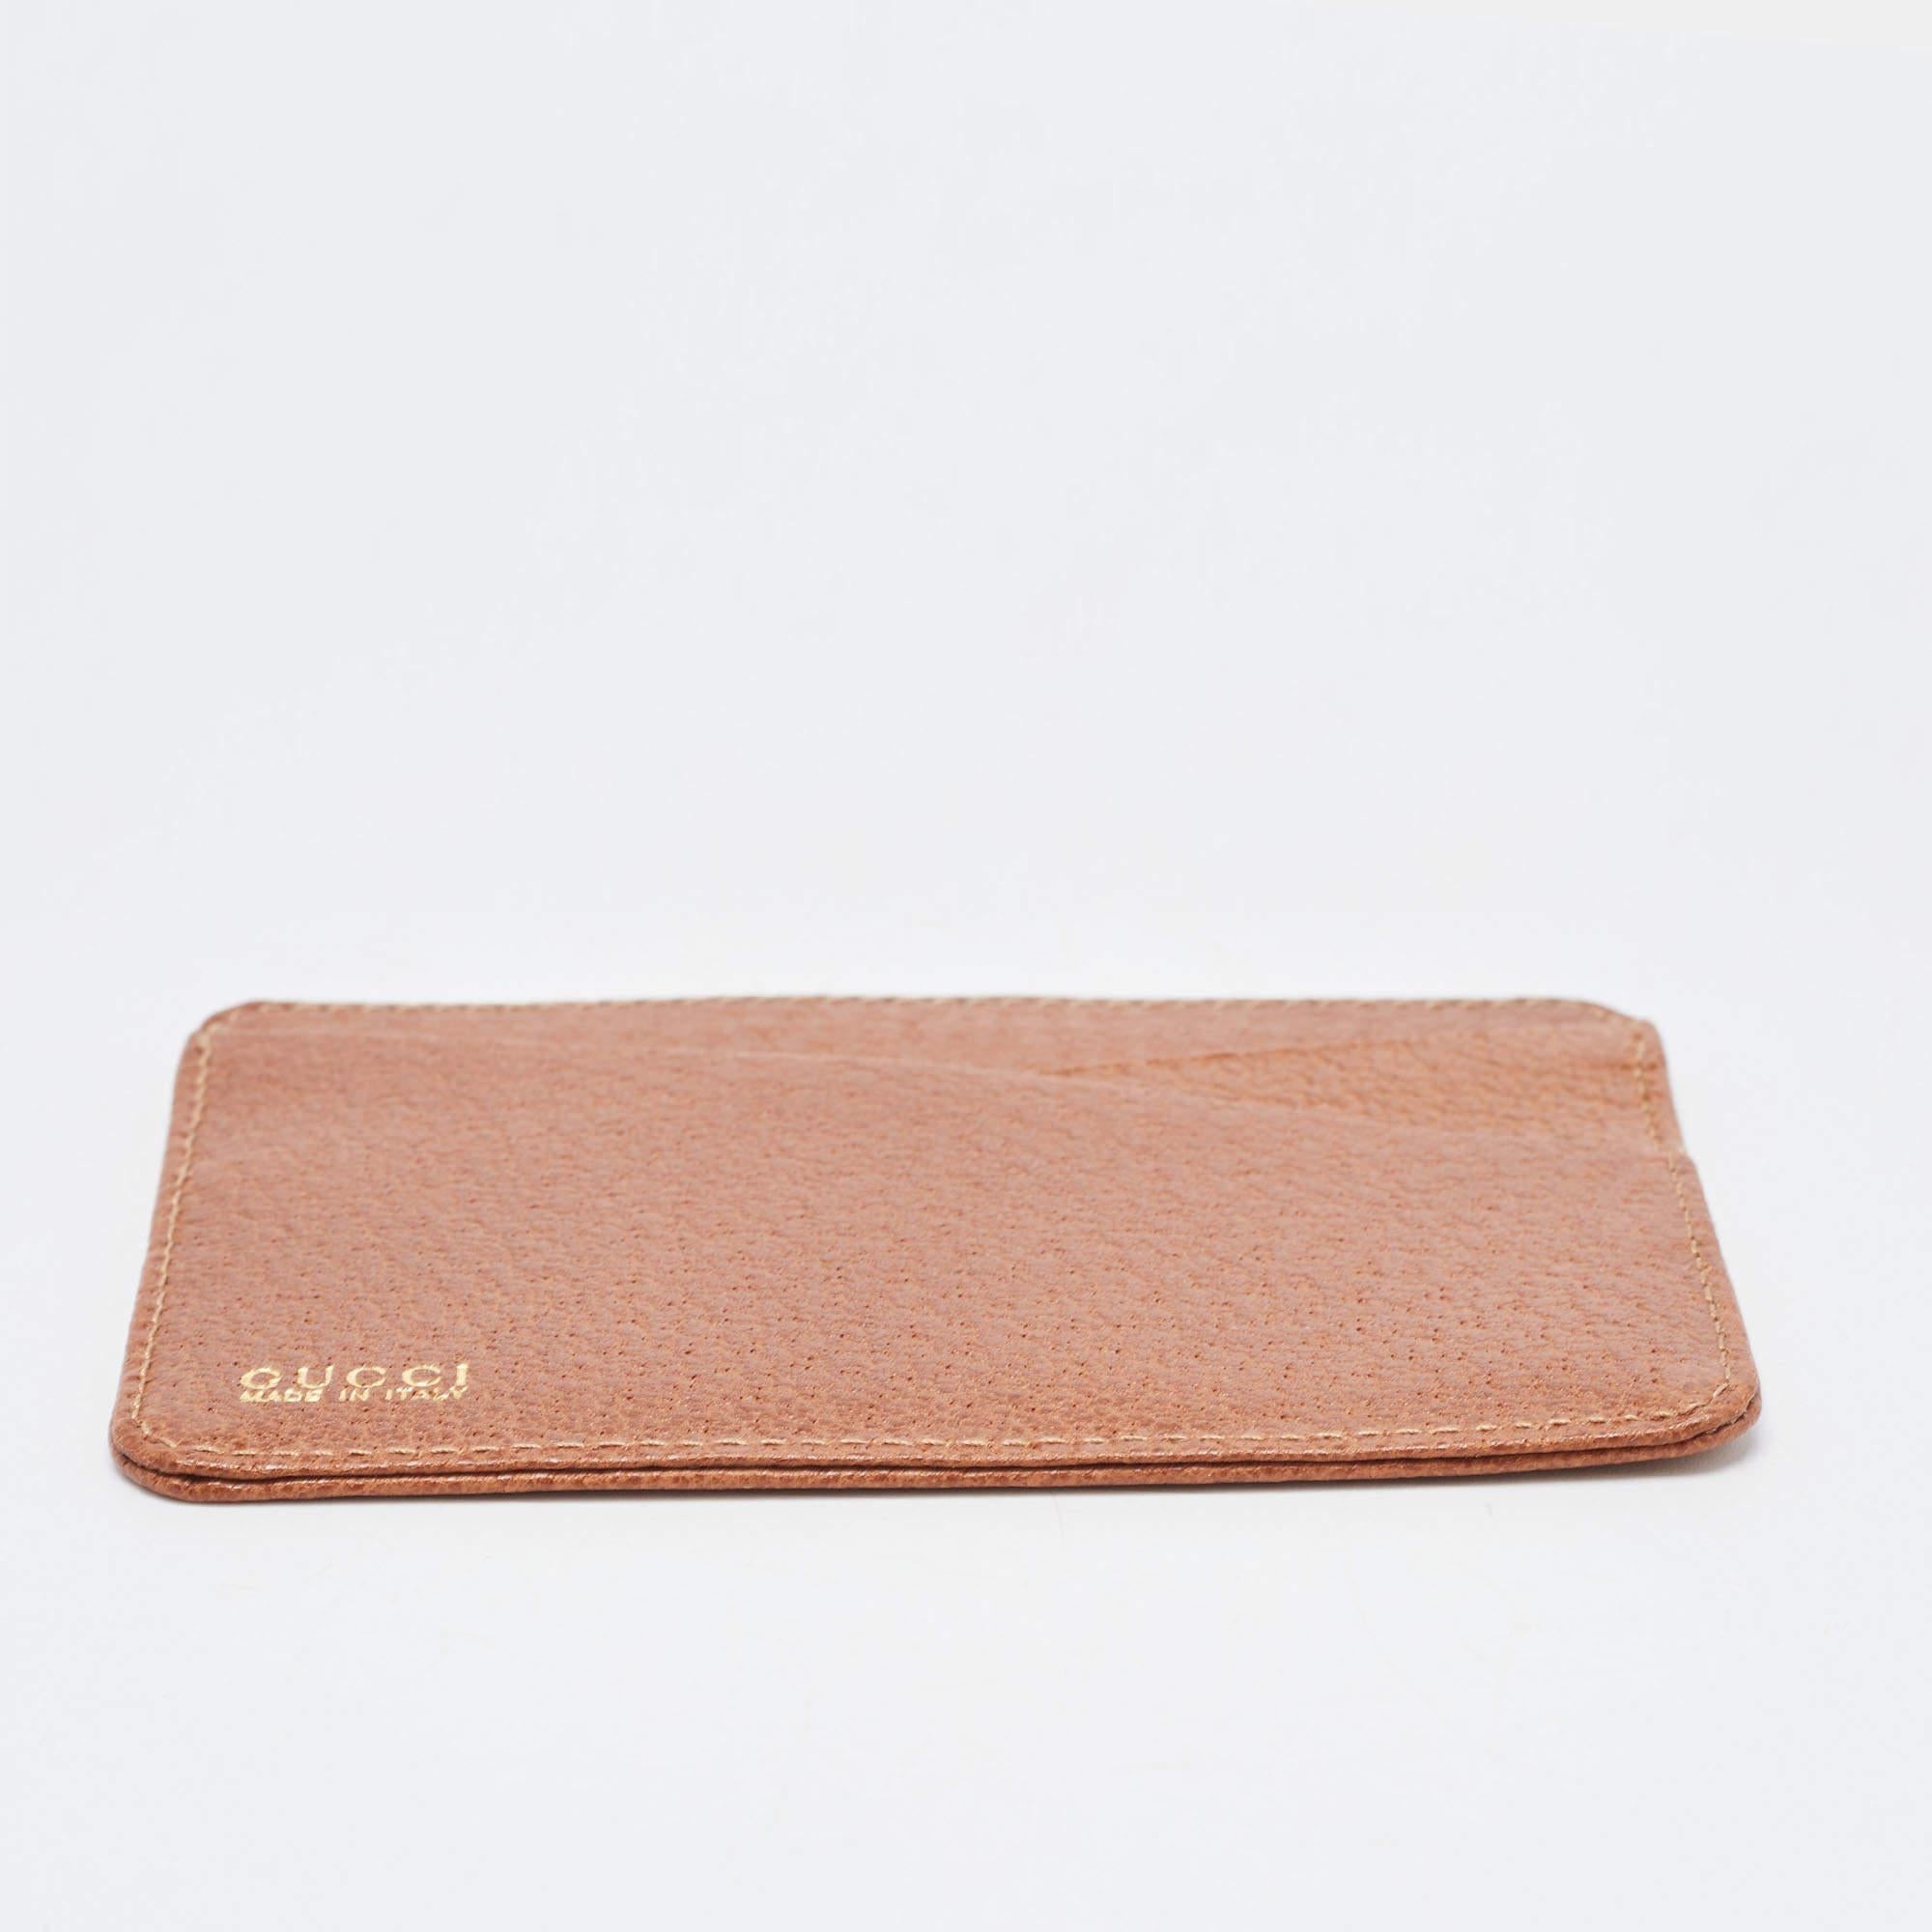 The Gucci cardholder combines elegance and functionality in a sleek design. Crafted from leather, it features a brown shade and the brand name on the front.

